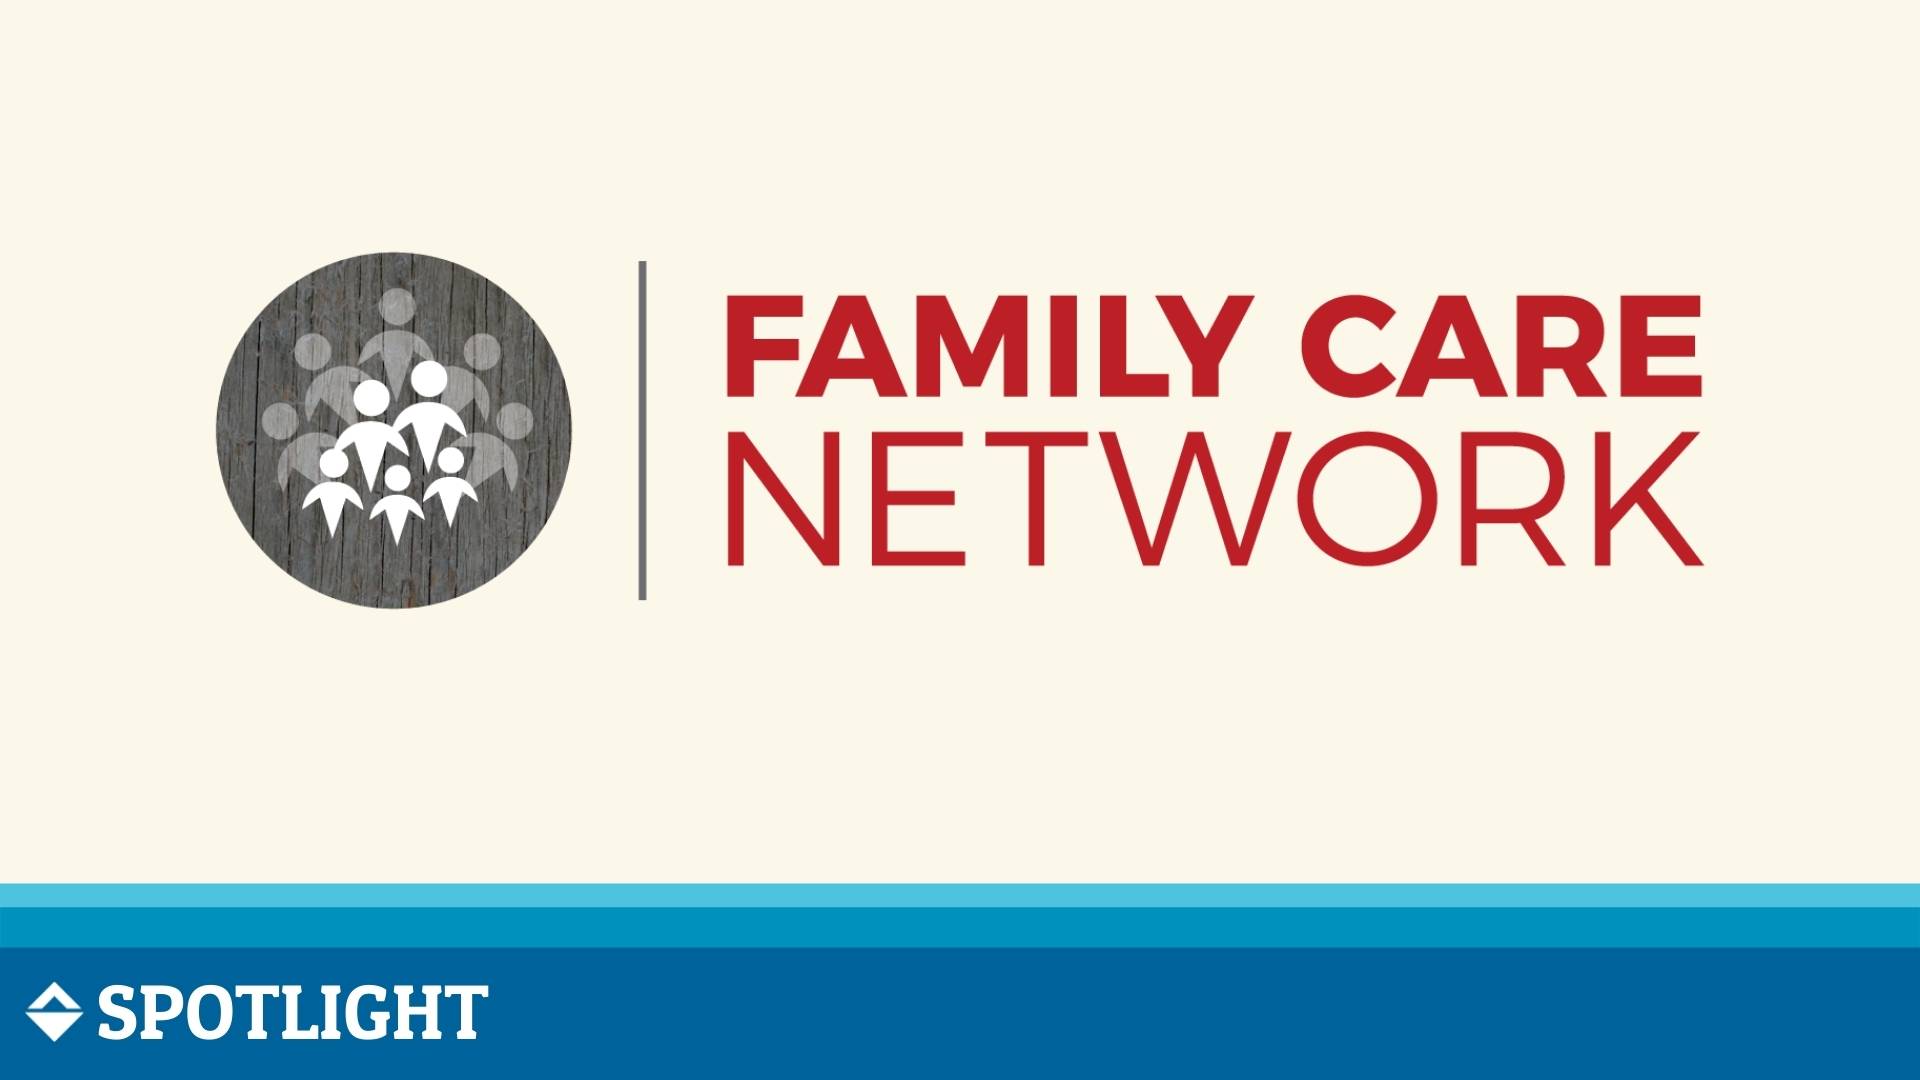 Family Care Network